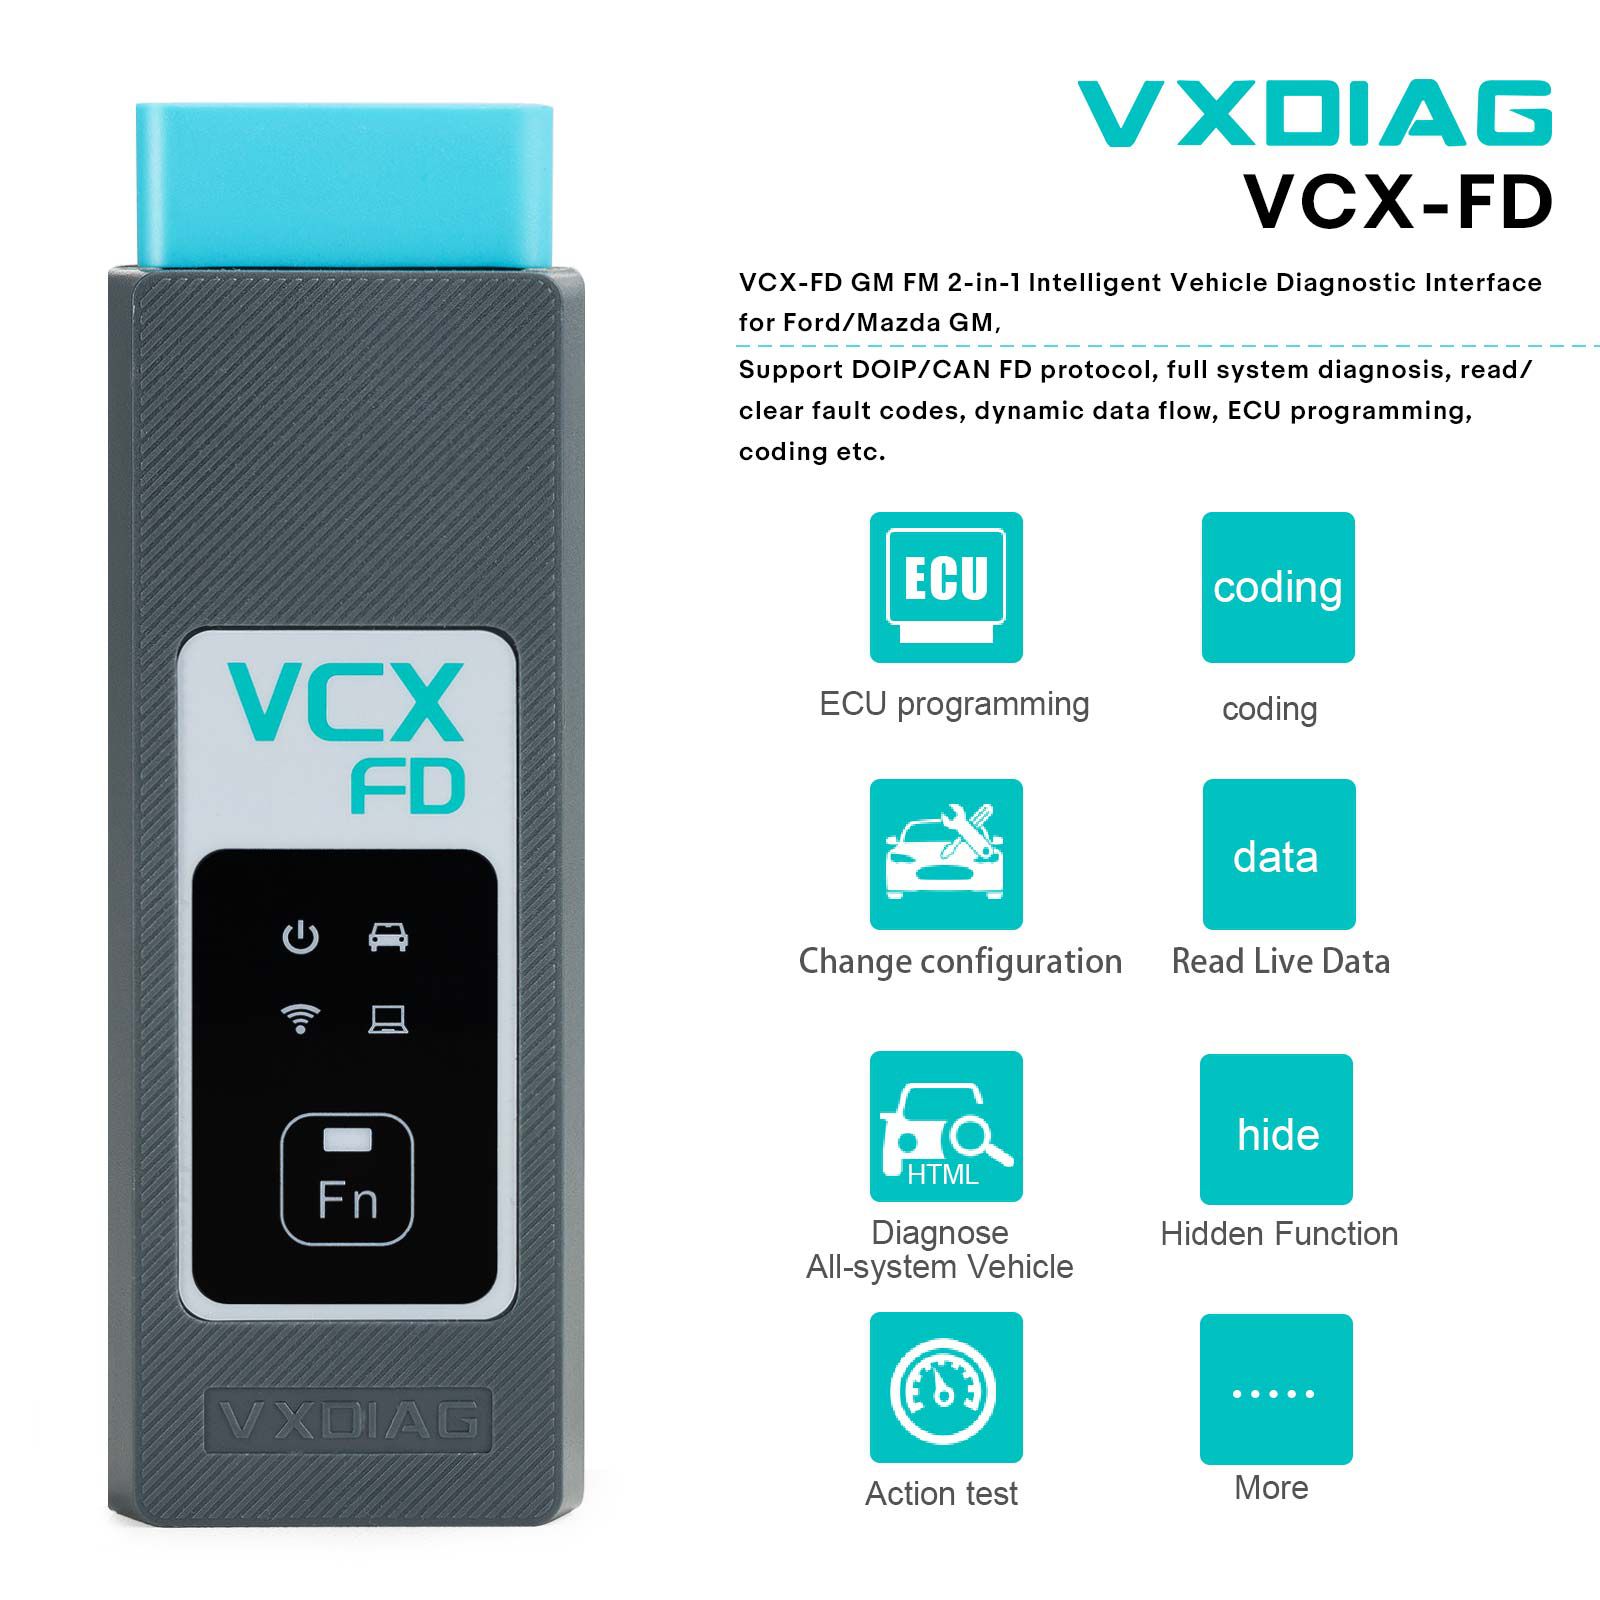 2024 VXDIAG VCX-FD for GM and Ford/Mazda 2-in-1 Intelligent Diagnostic Interface for Ford/Mazda GM Chevrolet, Buick, Cadillac, Opel, Holden